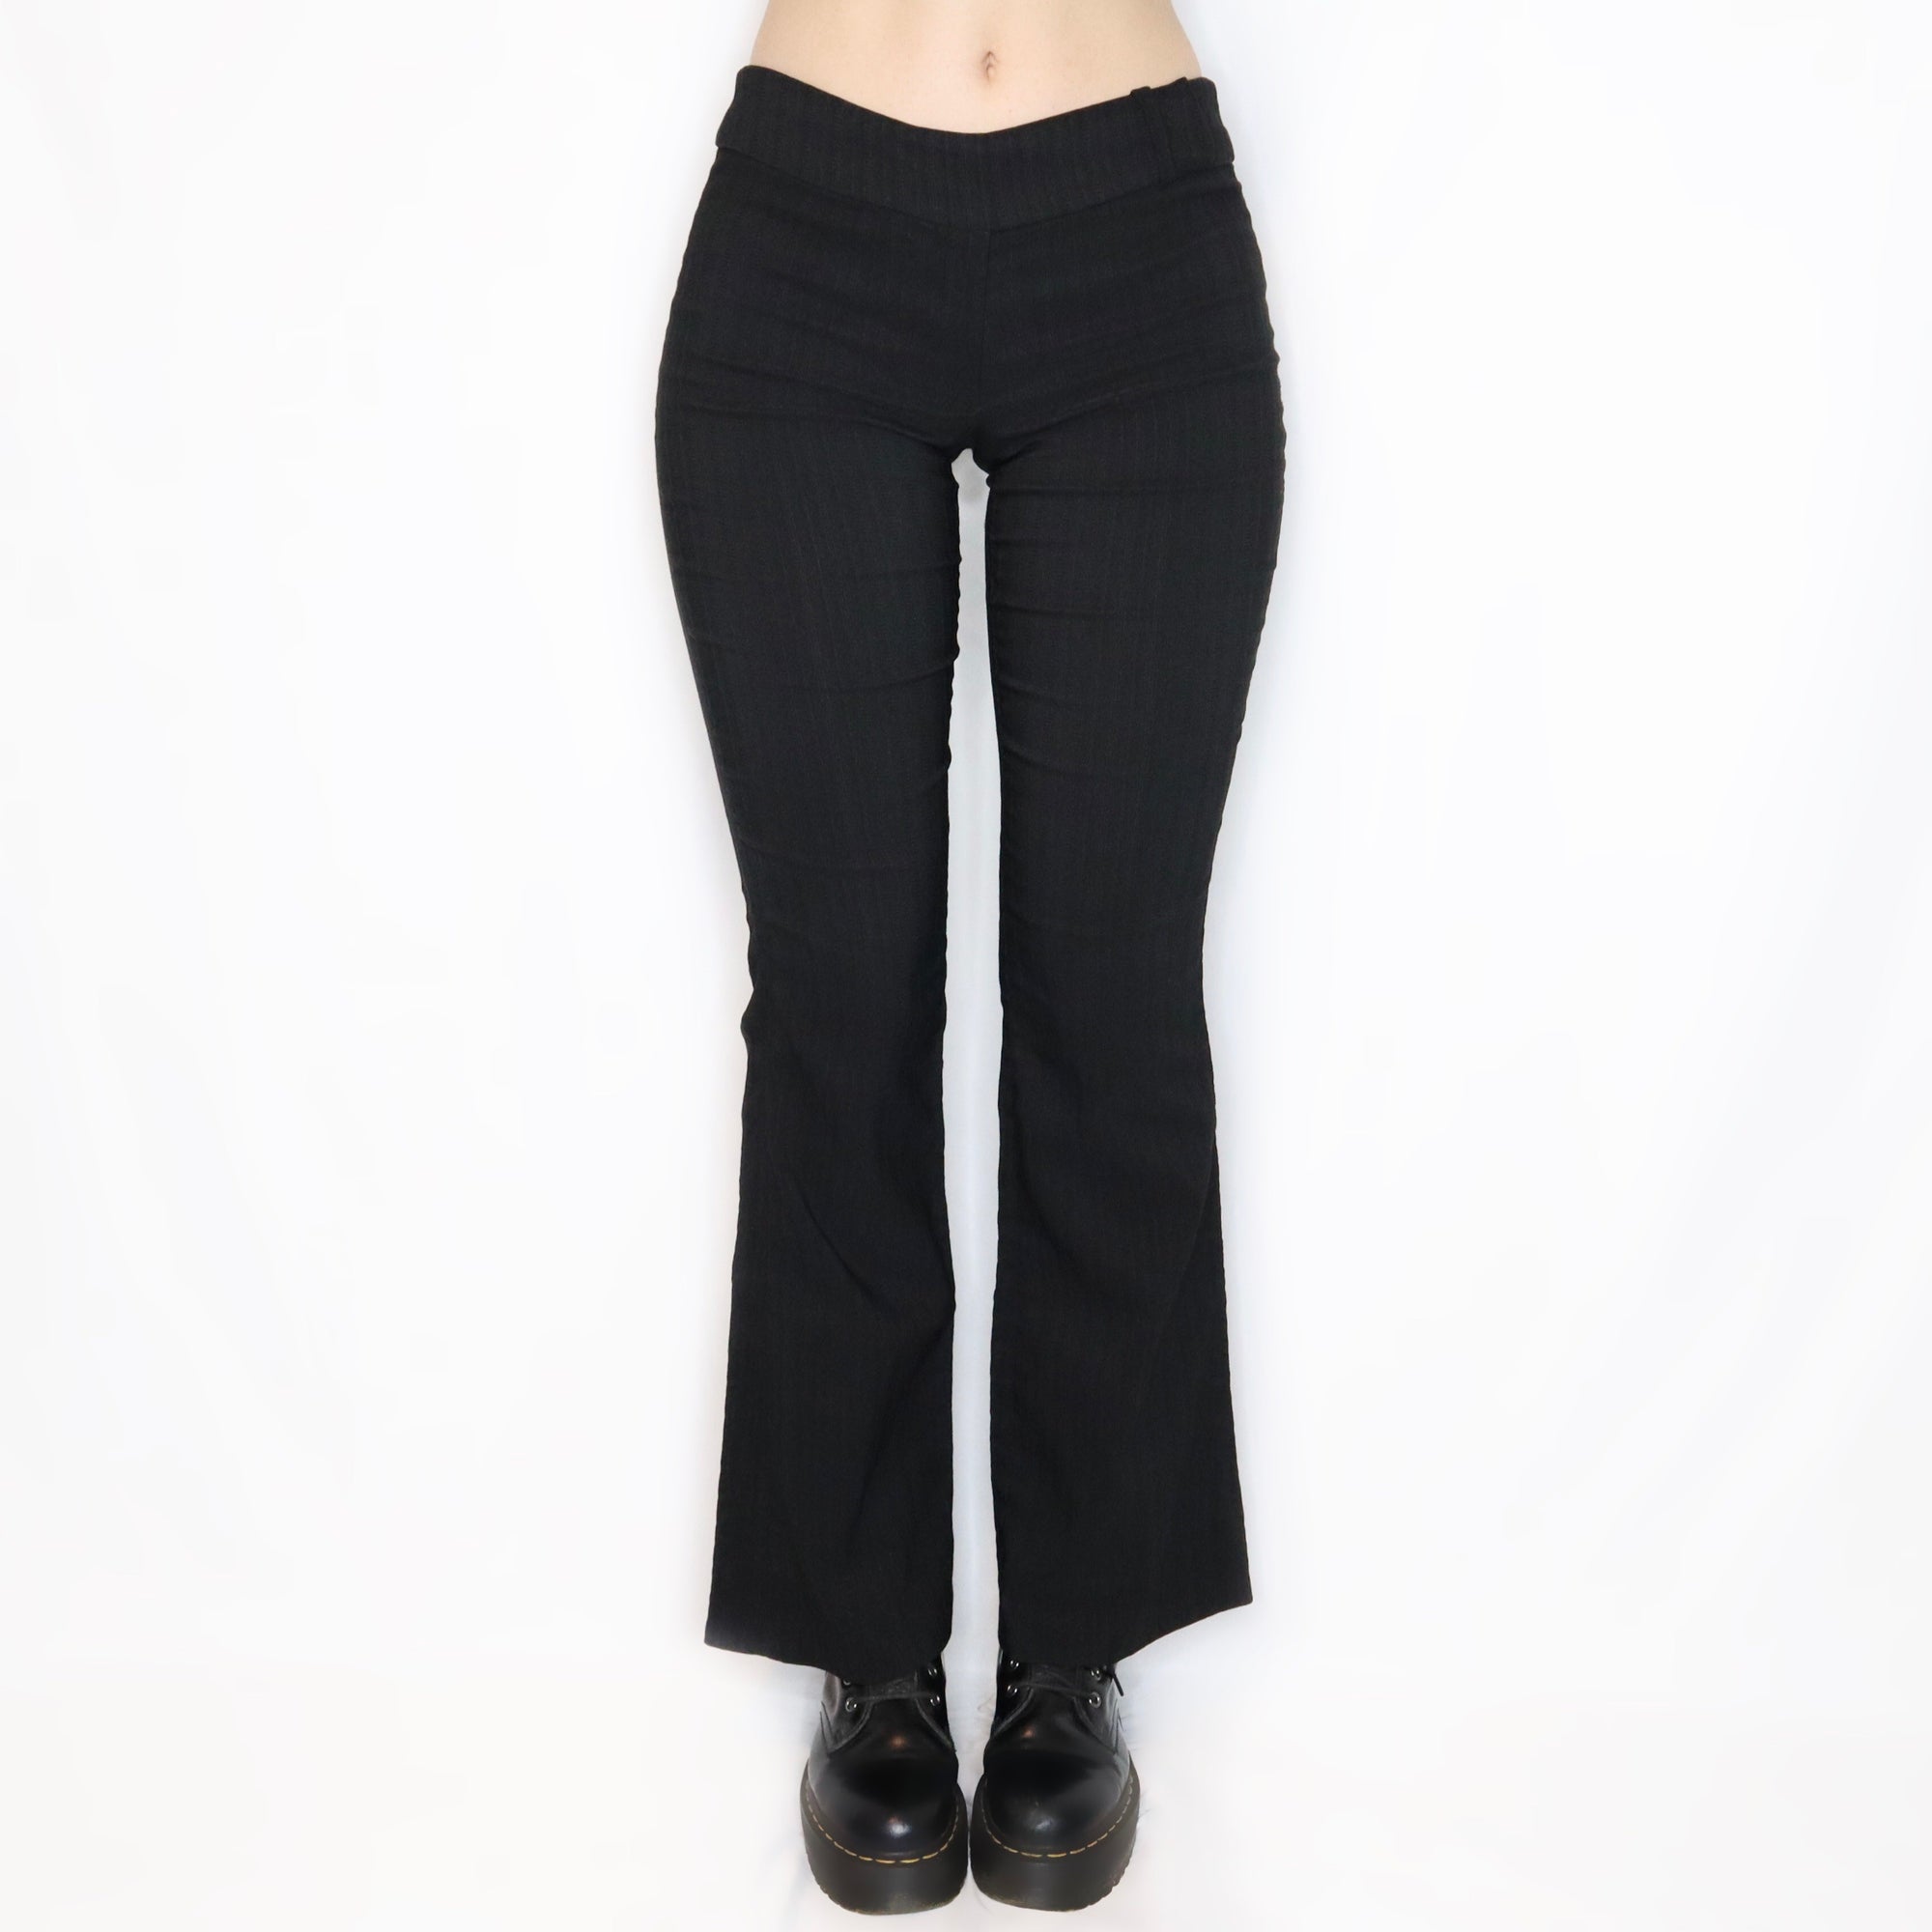 Vintage Early 2000s Low Rise Black Pinstripe Flare Pants